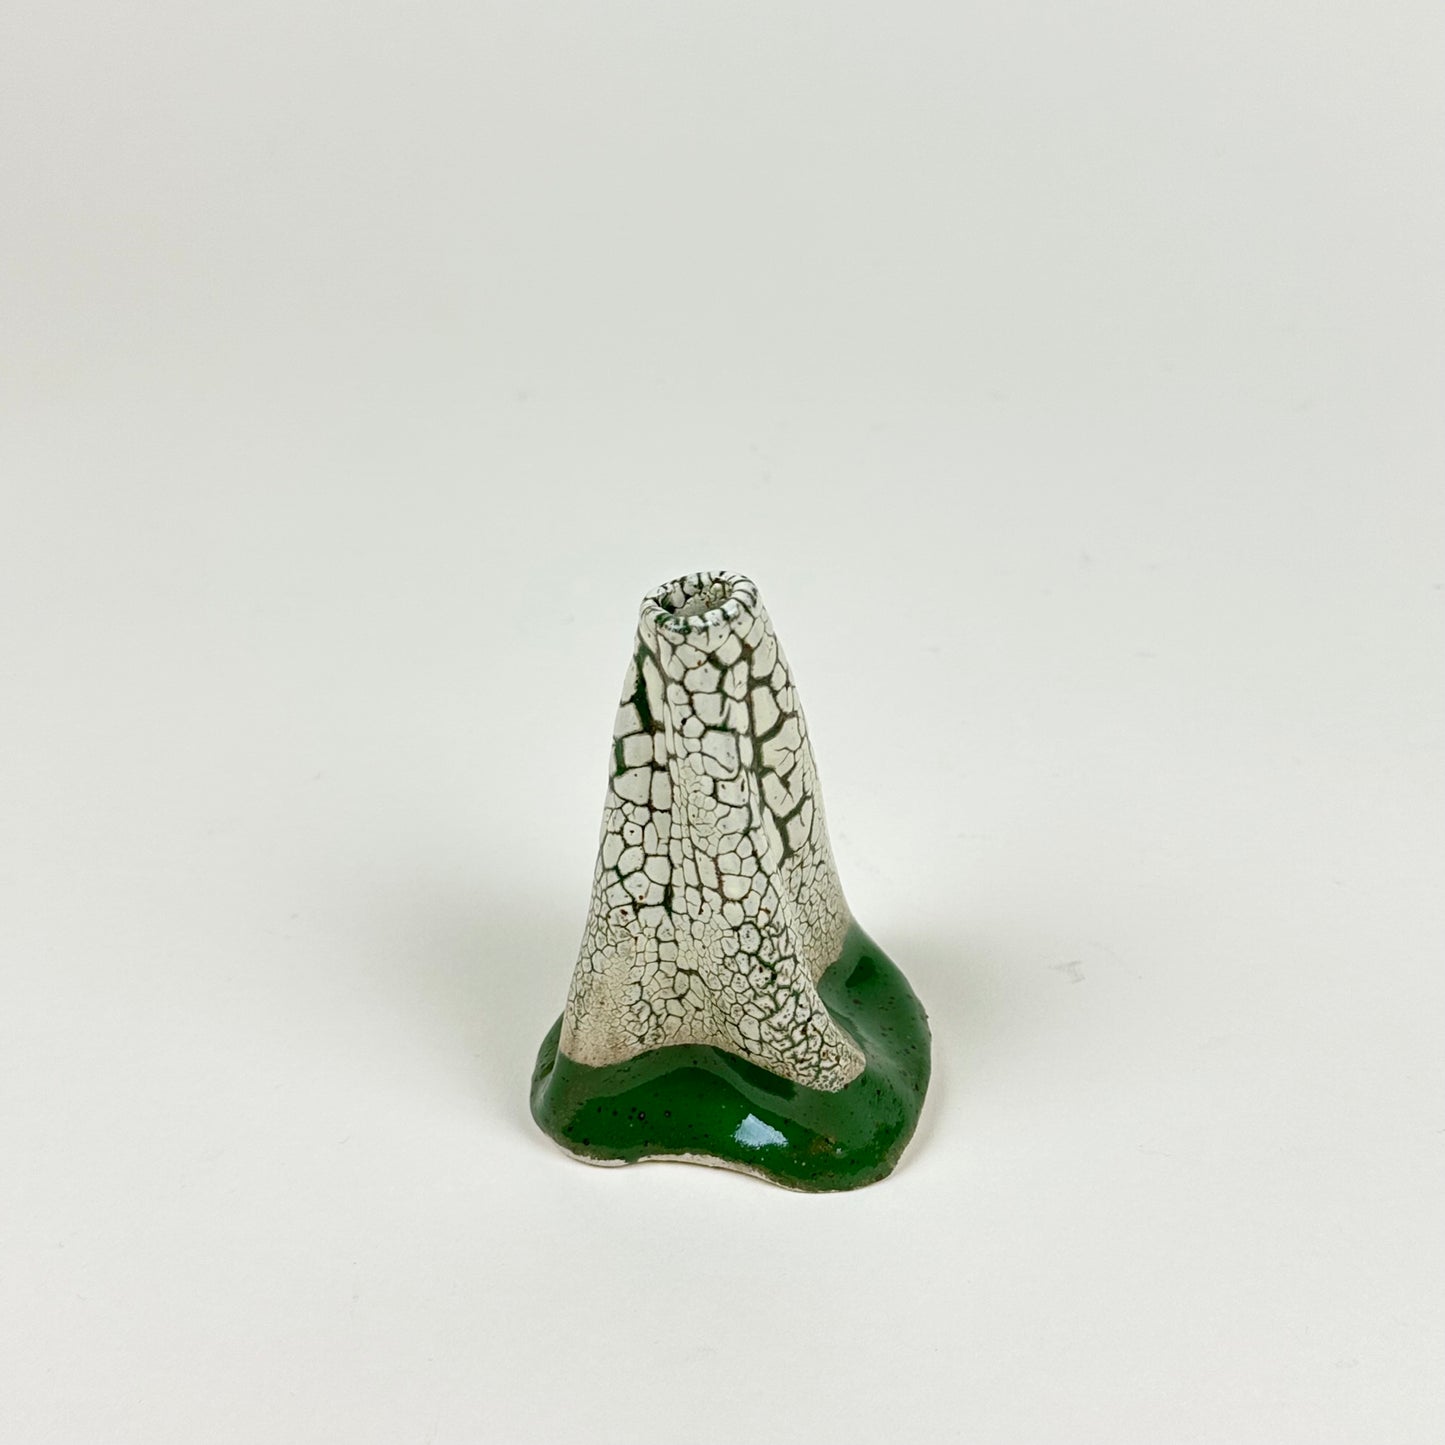 Green and white volcano vase (S) by Astrid Öhman.